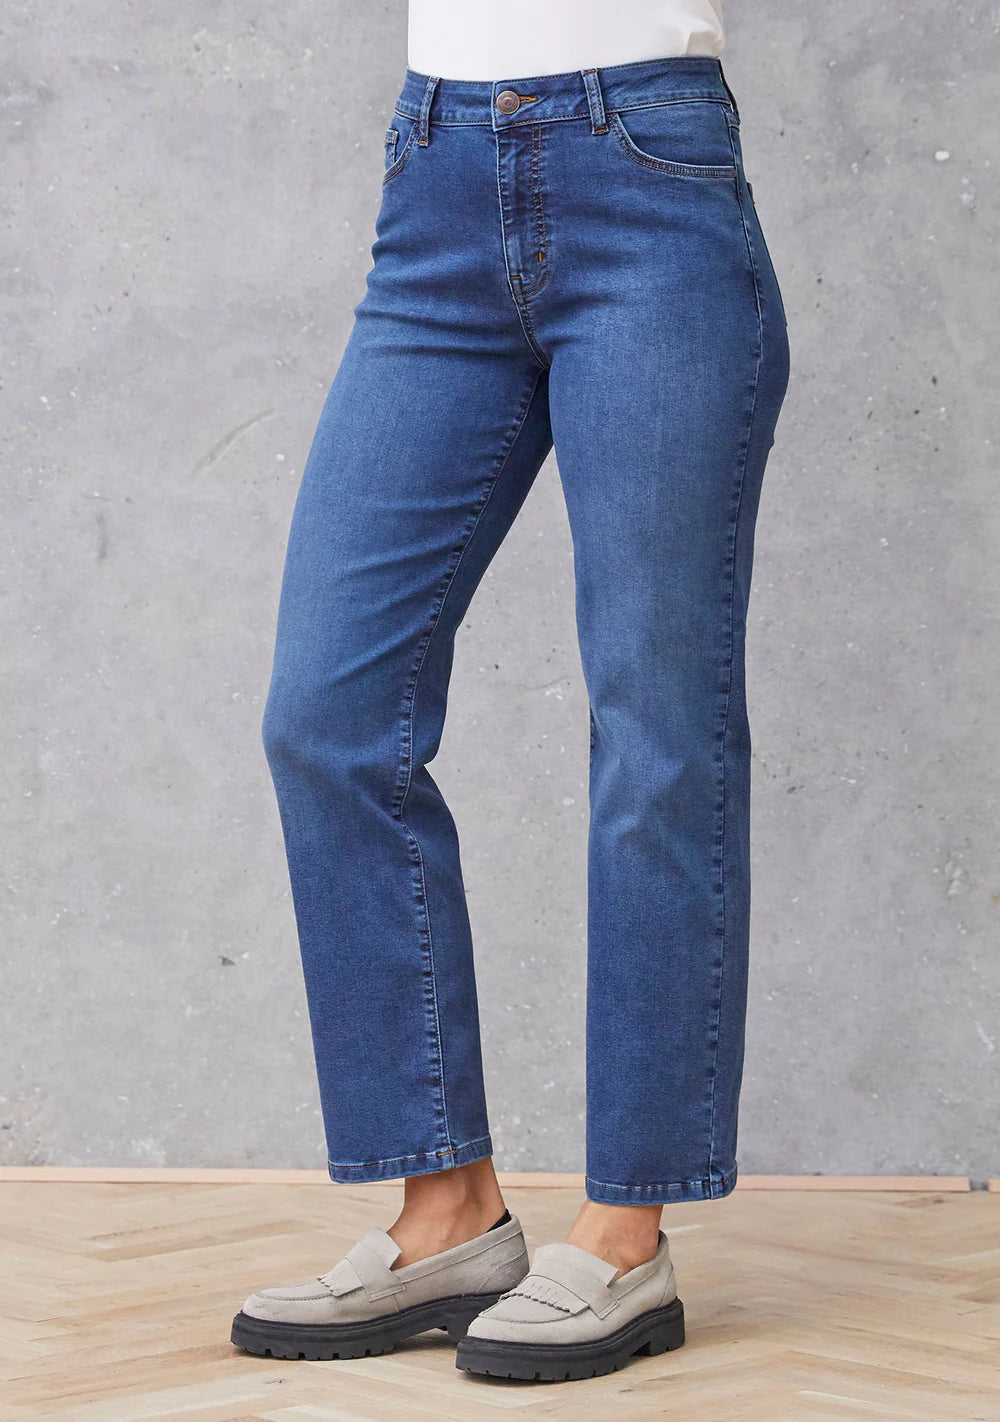 Isay Lido Straight Long Jeans - Blue Wash Denim